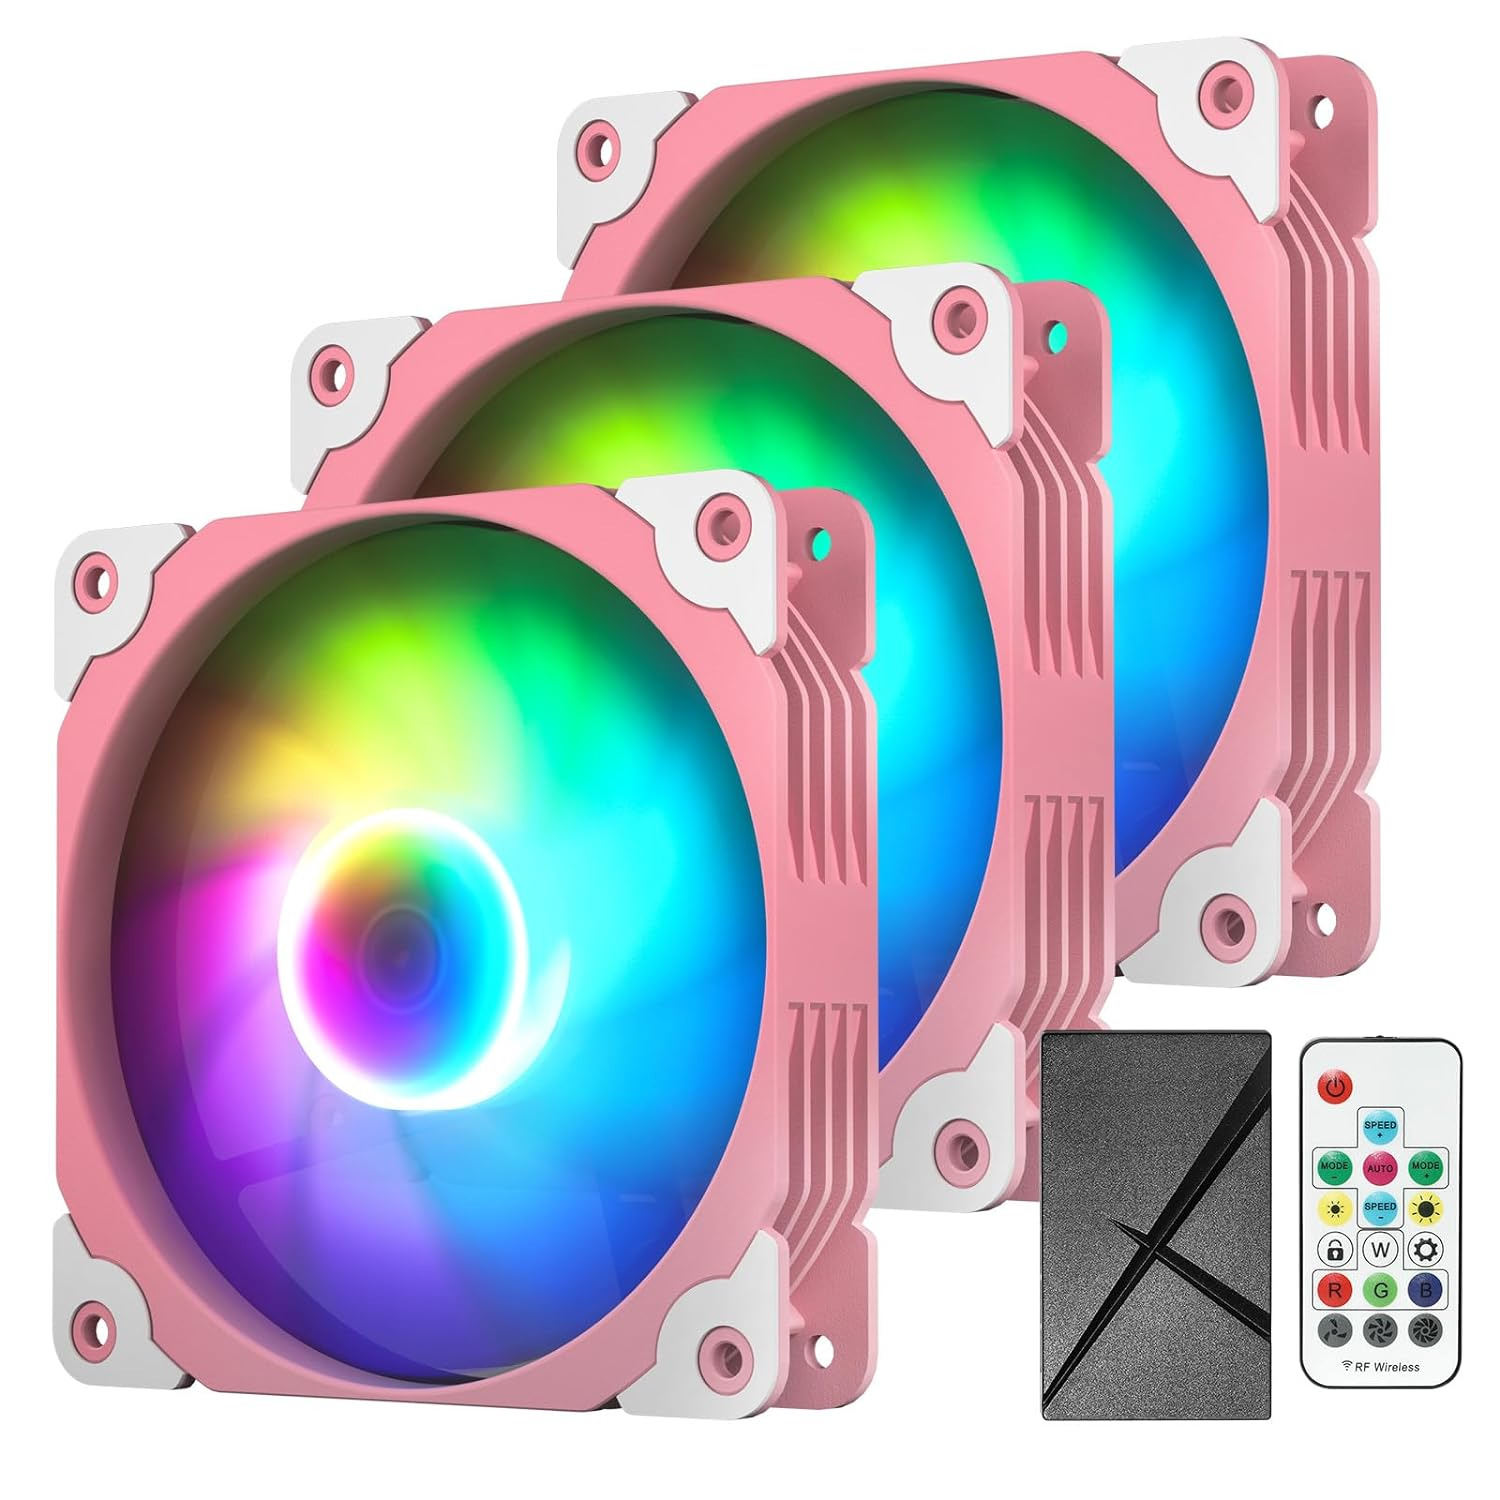 Vetroo 3 Pack 120Mm ARGB & PWM Case Fans with Controller High Airflow Addressab